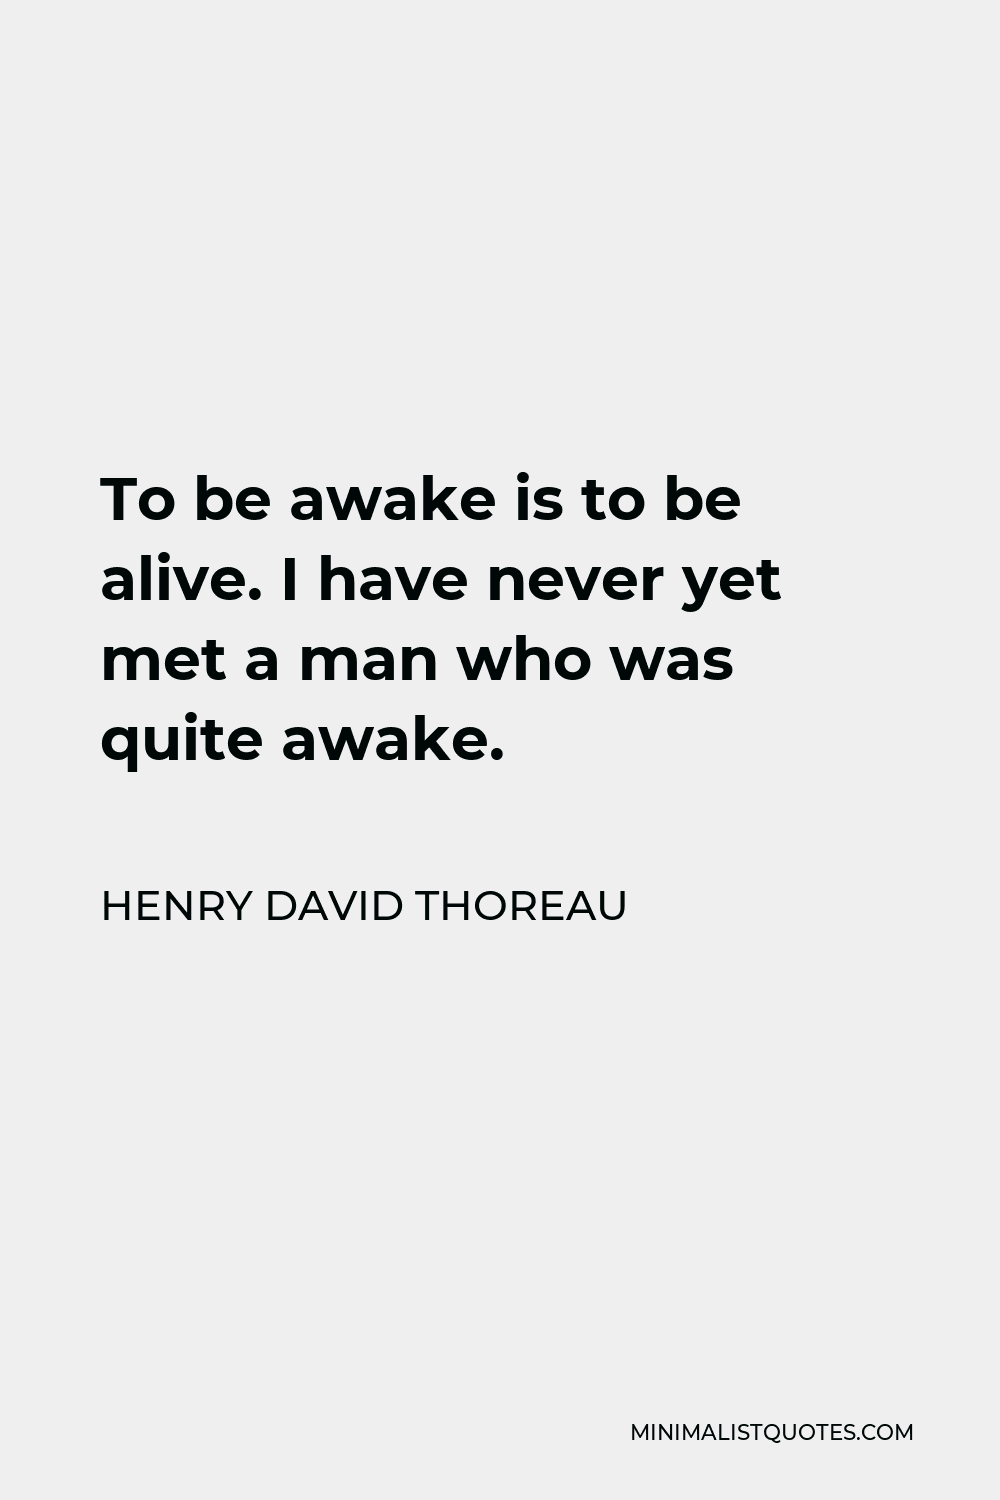 Henry David Thoreau Quote - To be awake is to be alive. I have never yet met a man who was quite awake.